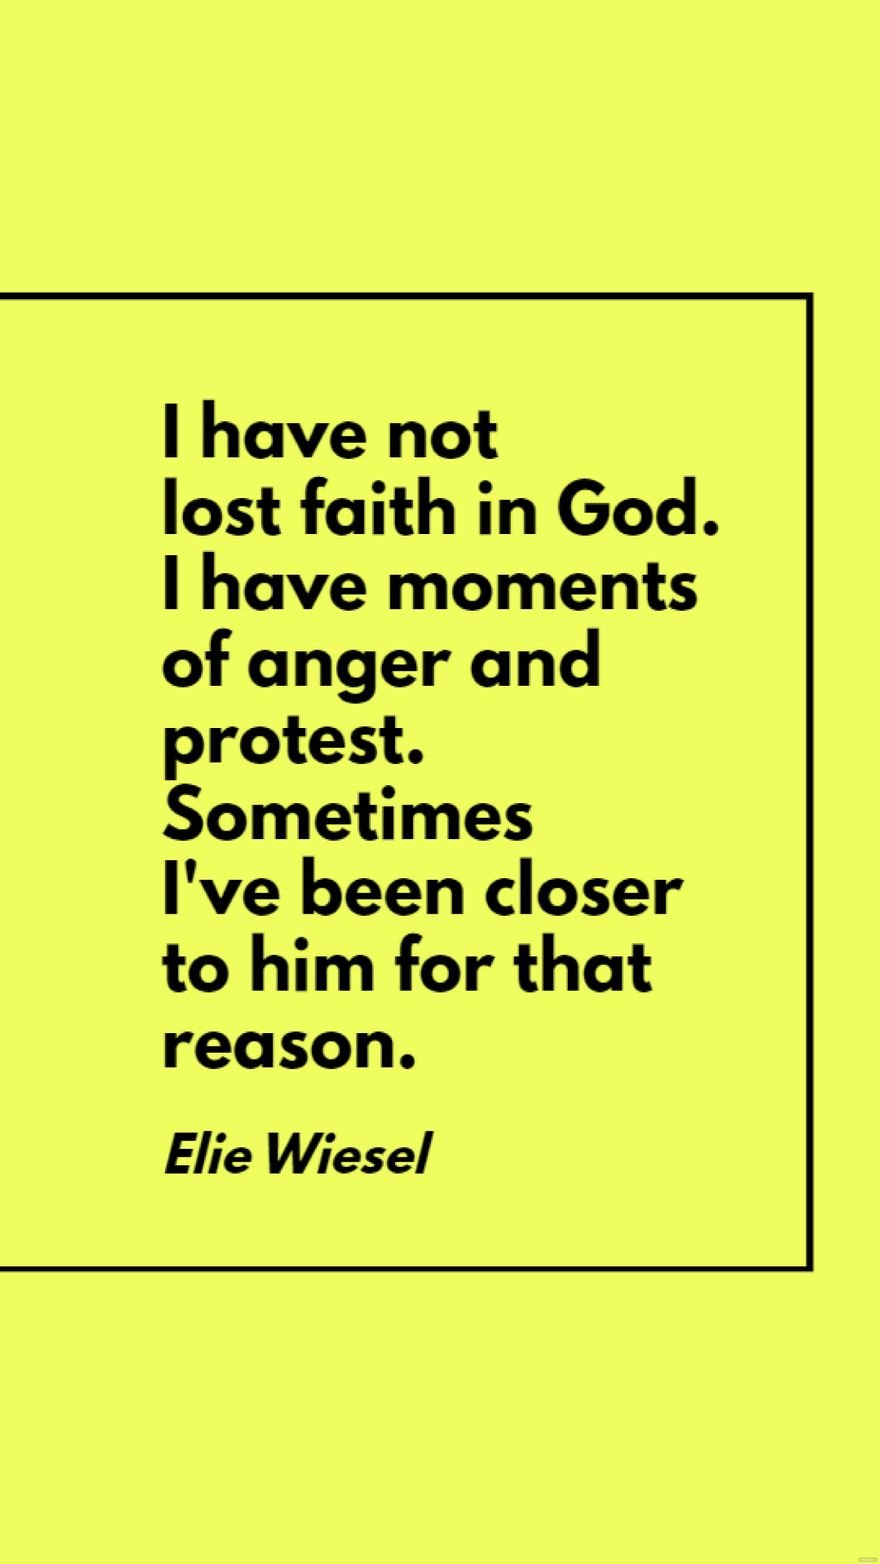 Elie Wiesel - I have not lost faith in God. I have moments of anger and protest. Sometimes I've been closer to him for that reason.